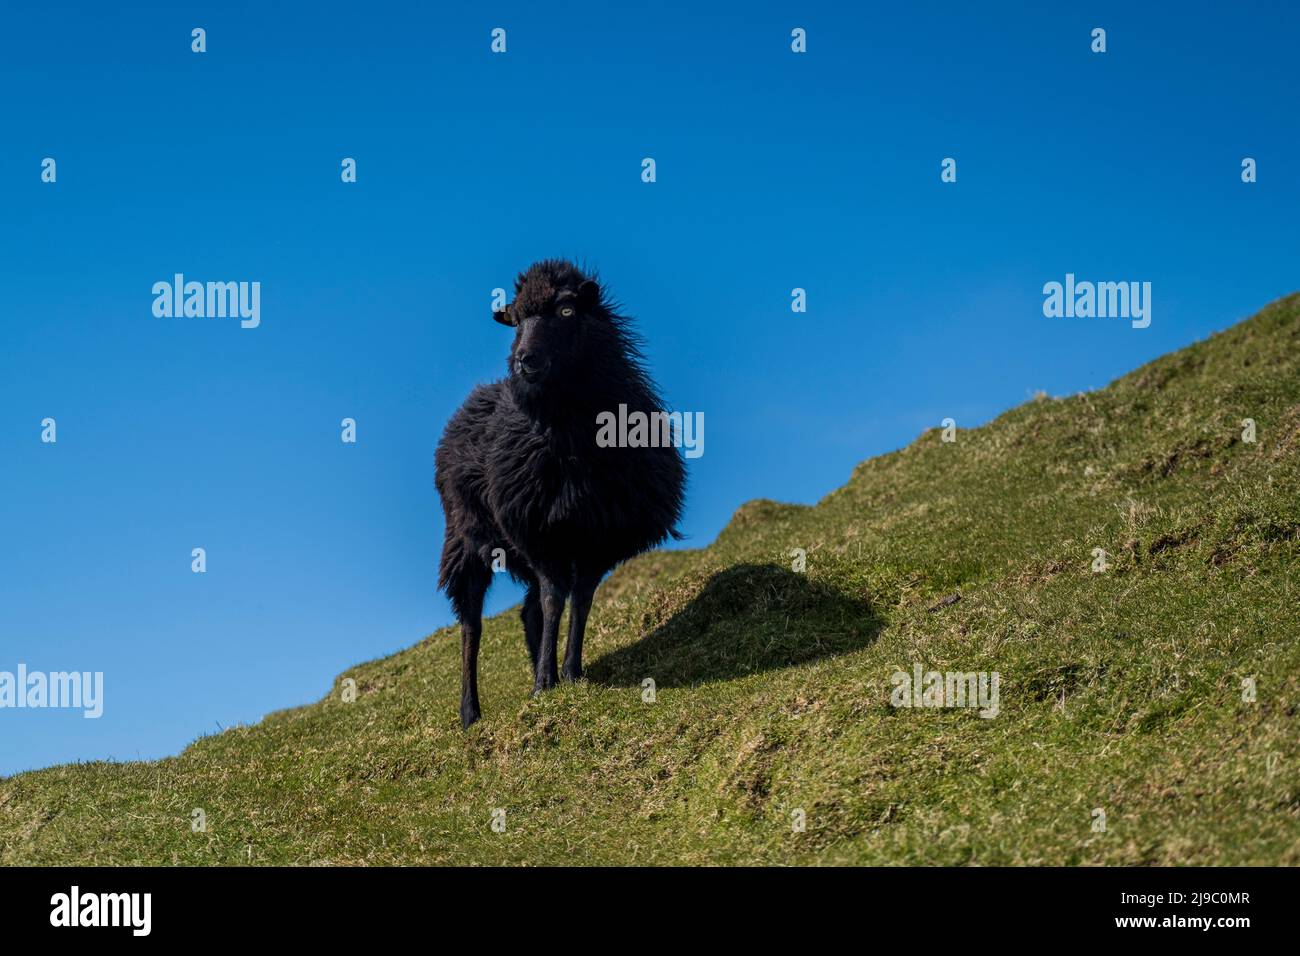 Poised black sheep looks regally from the cliffside against a backdrop of bright blue skies. Stock Photo